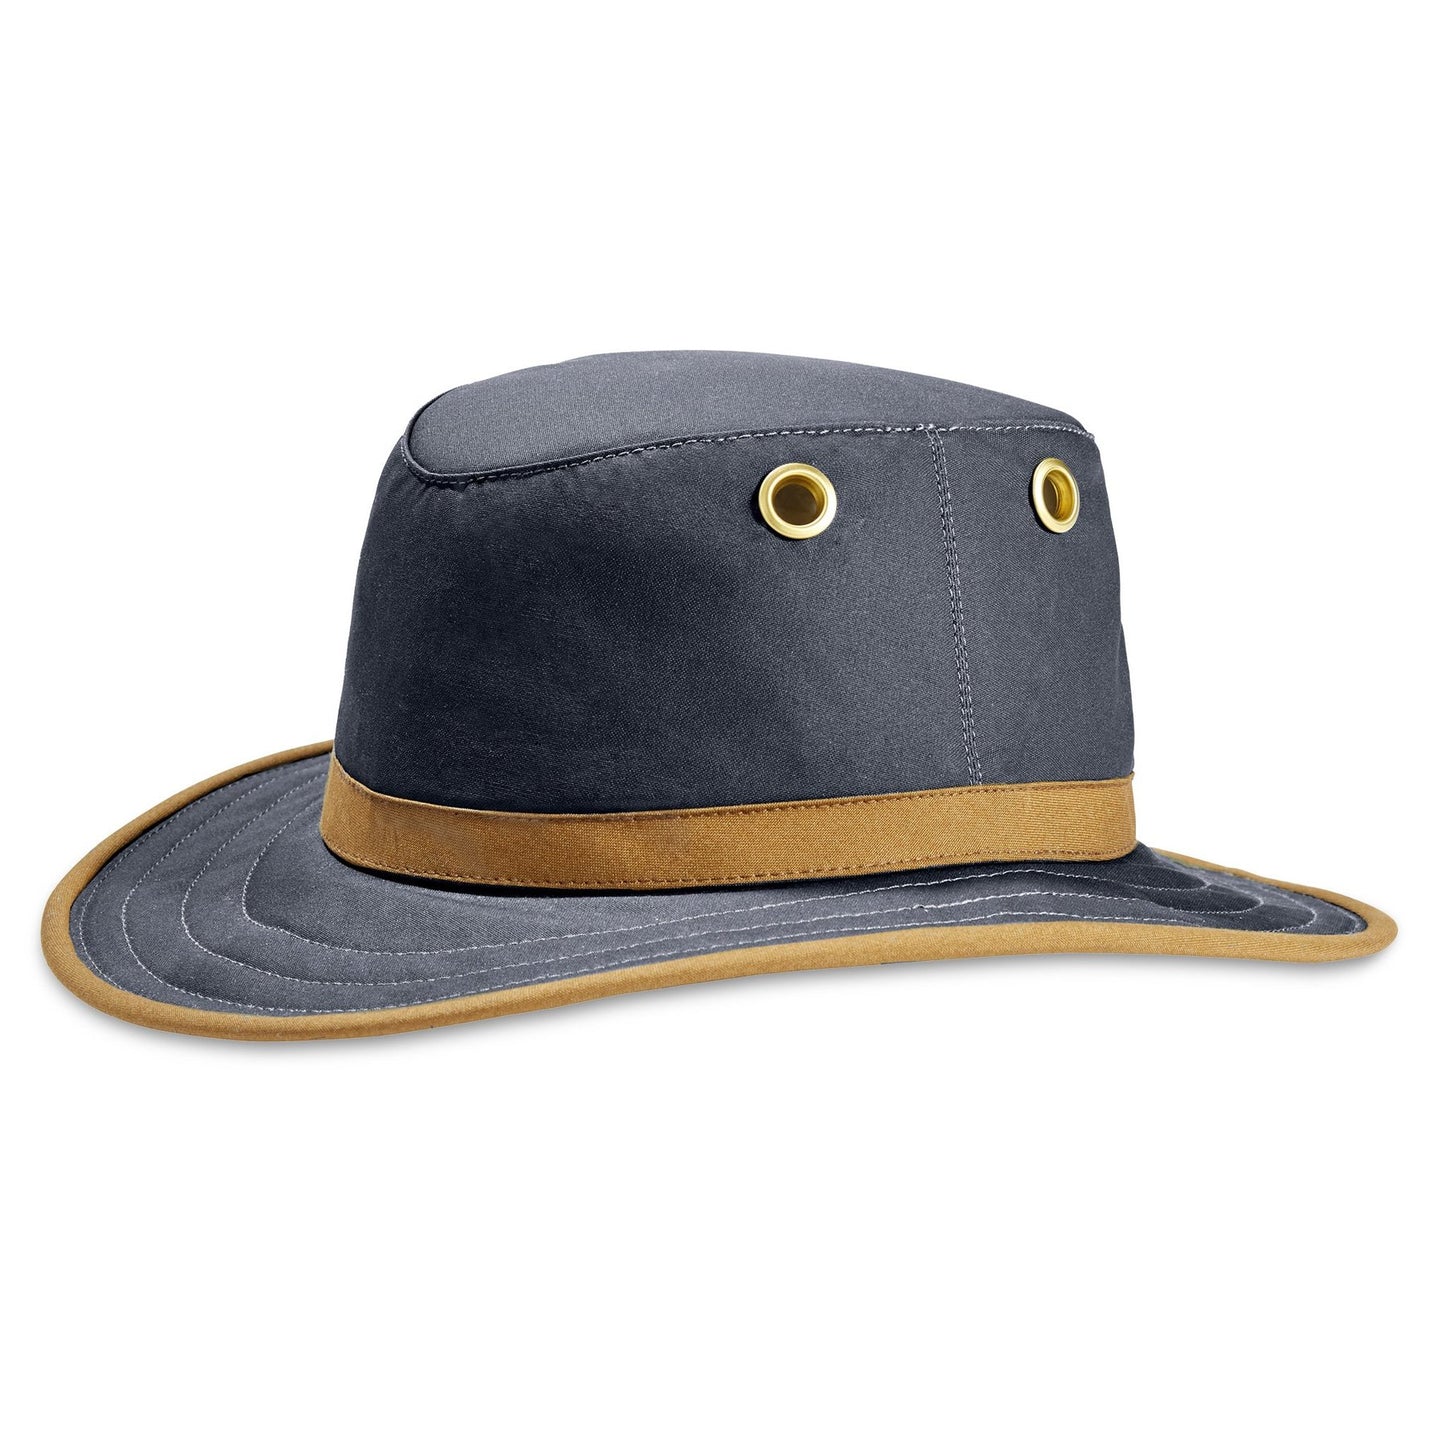 Tilley - TWC7 Outback Waxed Cotton Hat - Navy / Tan